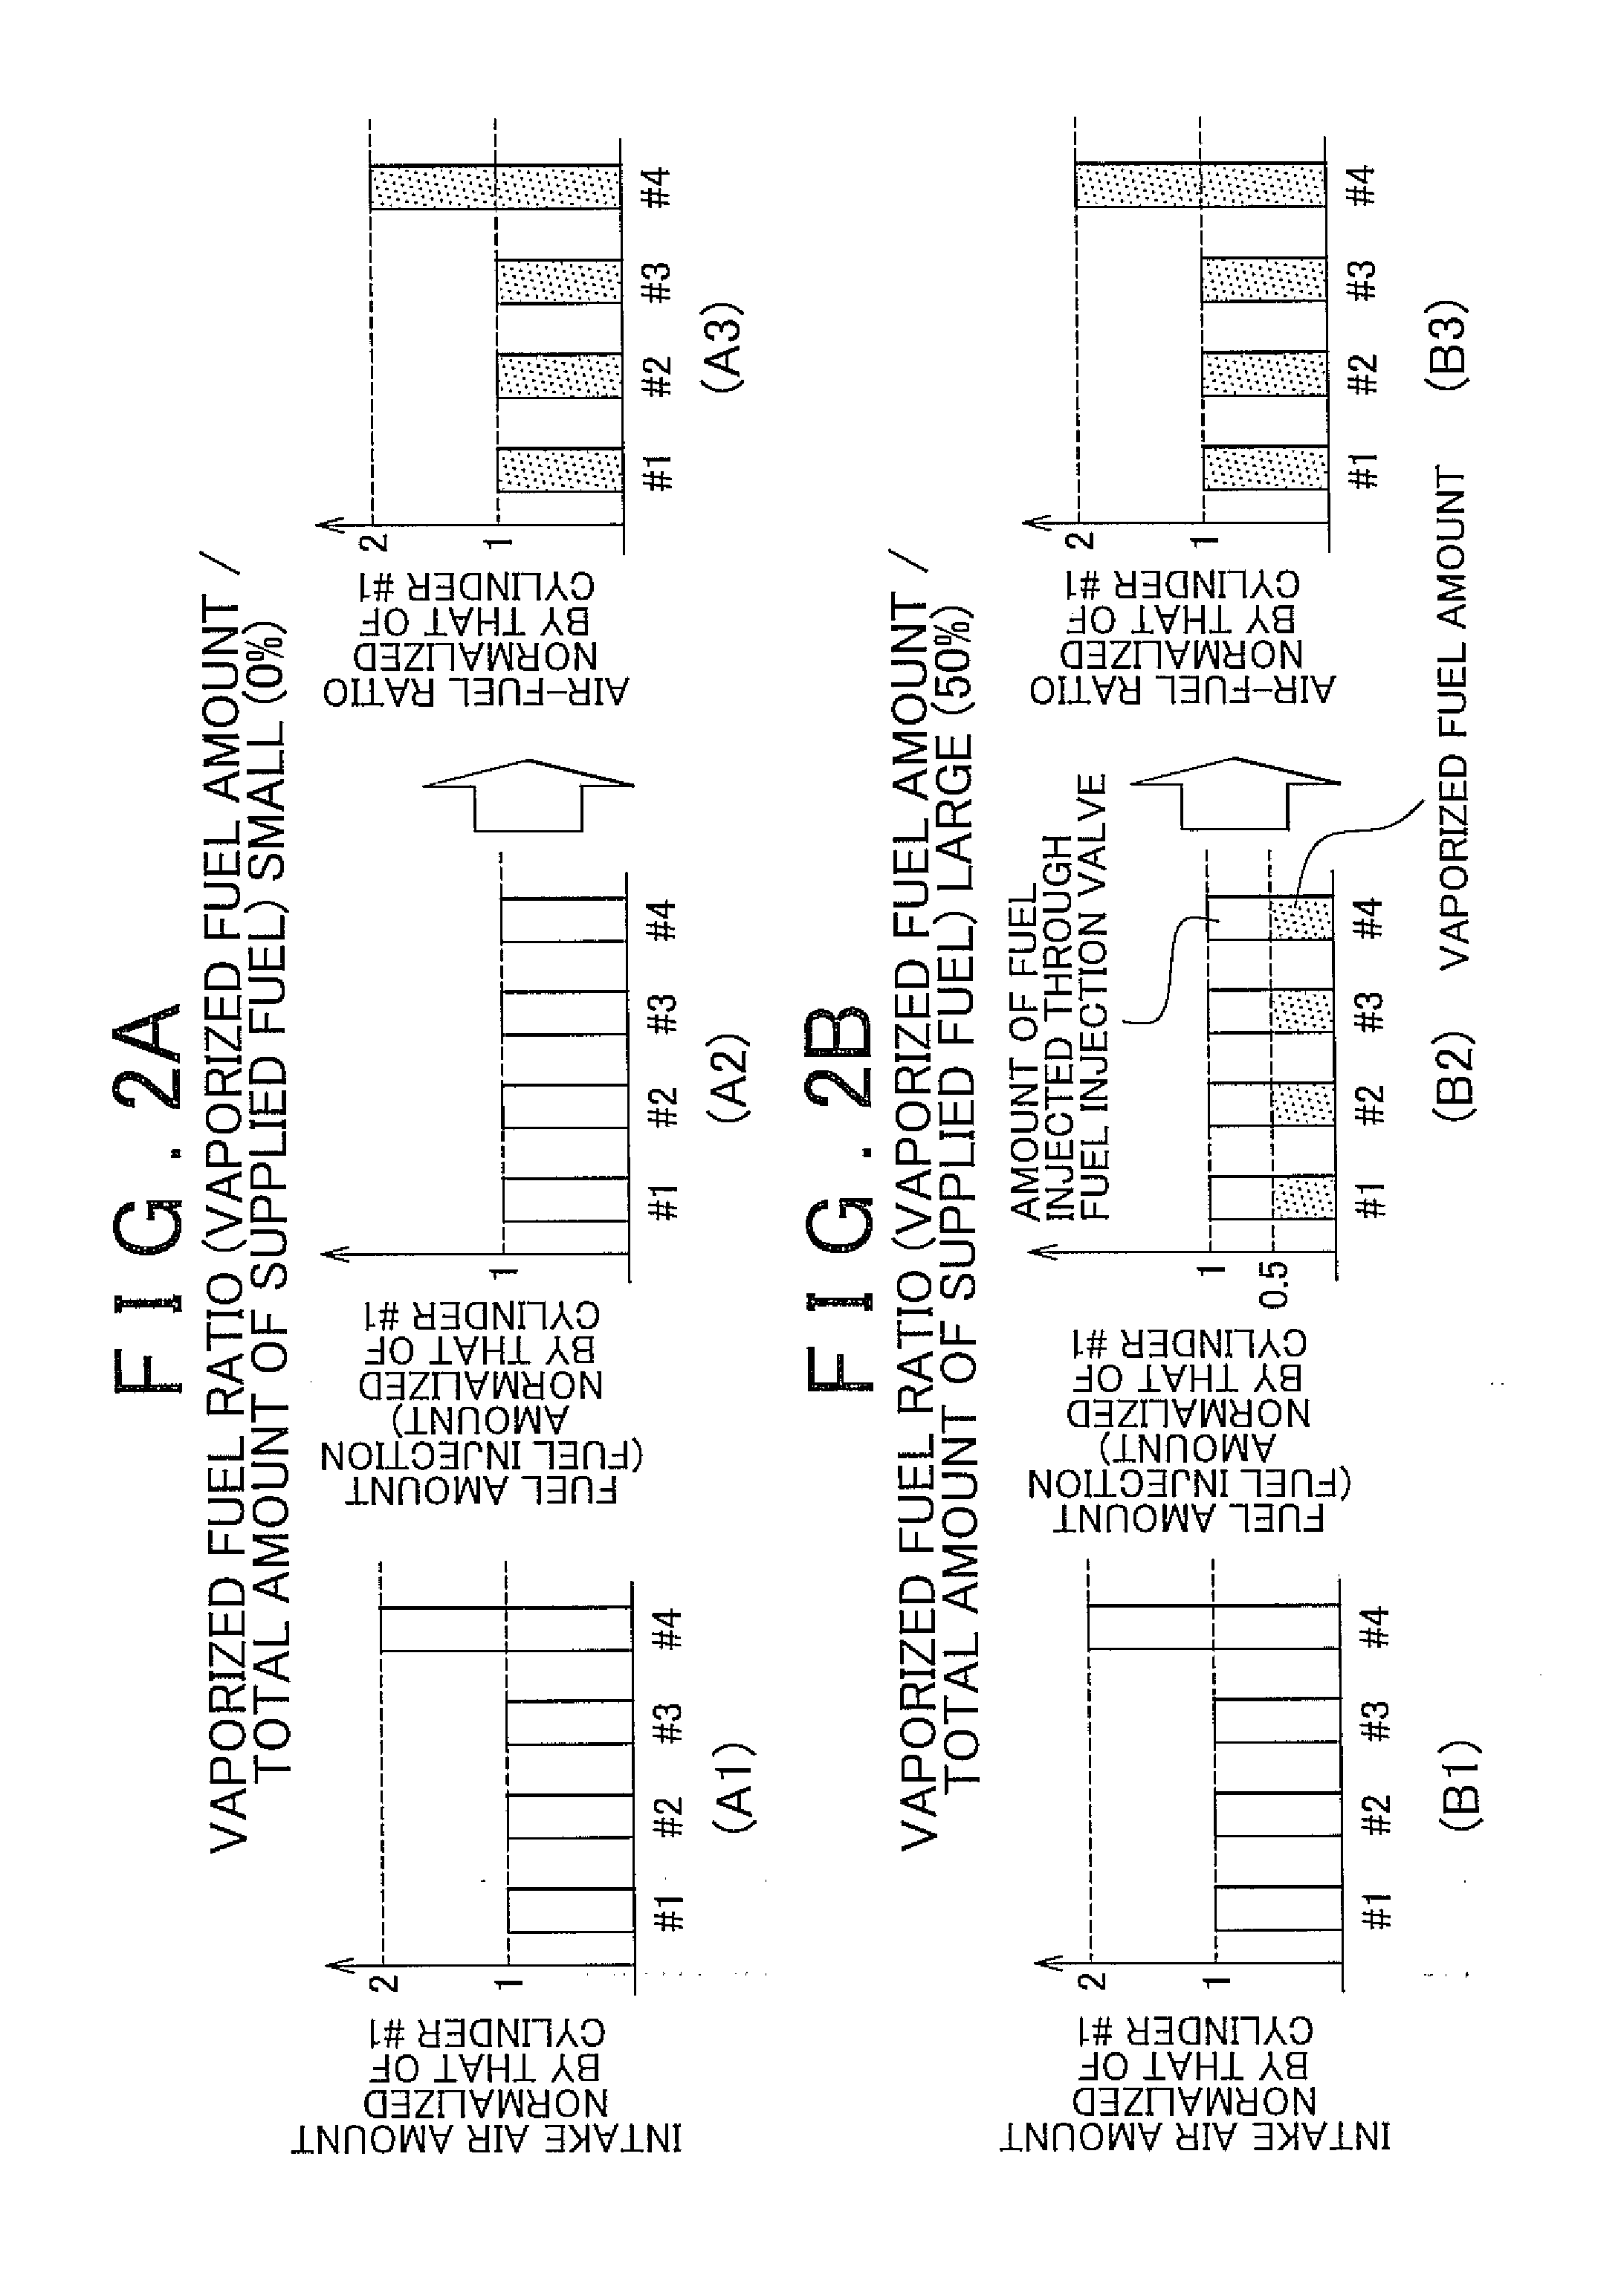 Abnormality determination system for multi-cylinder internal combustion engine